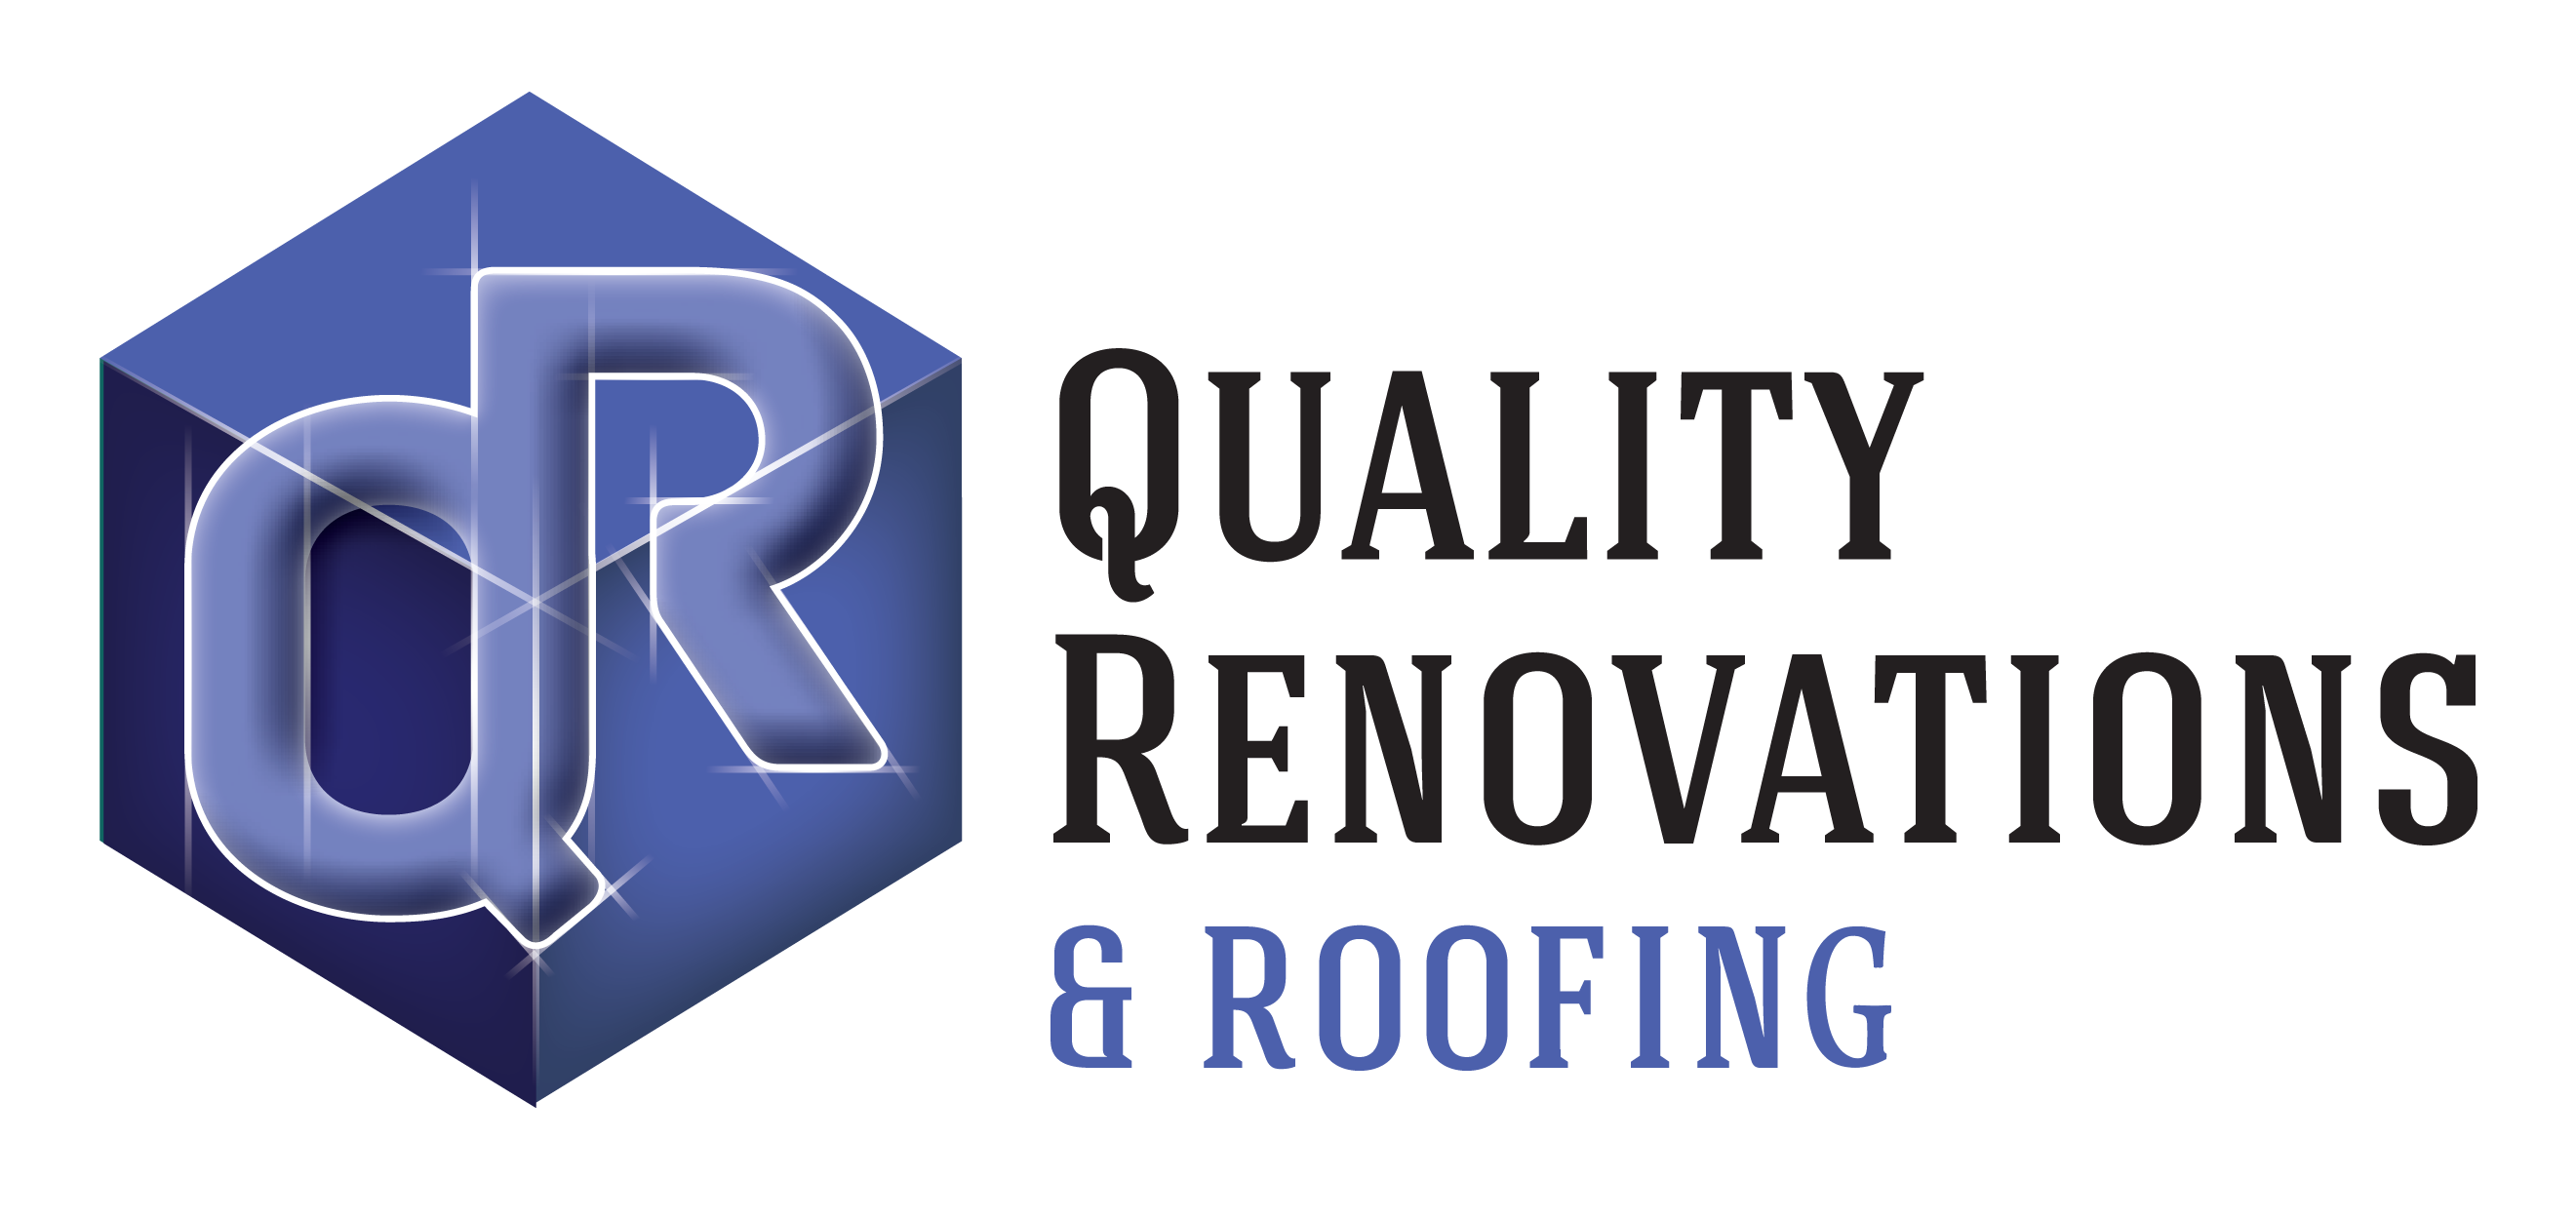 Quality Renovations & Roofing